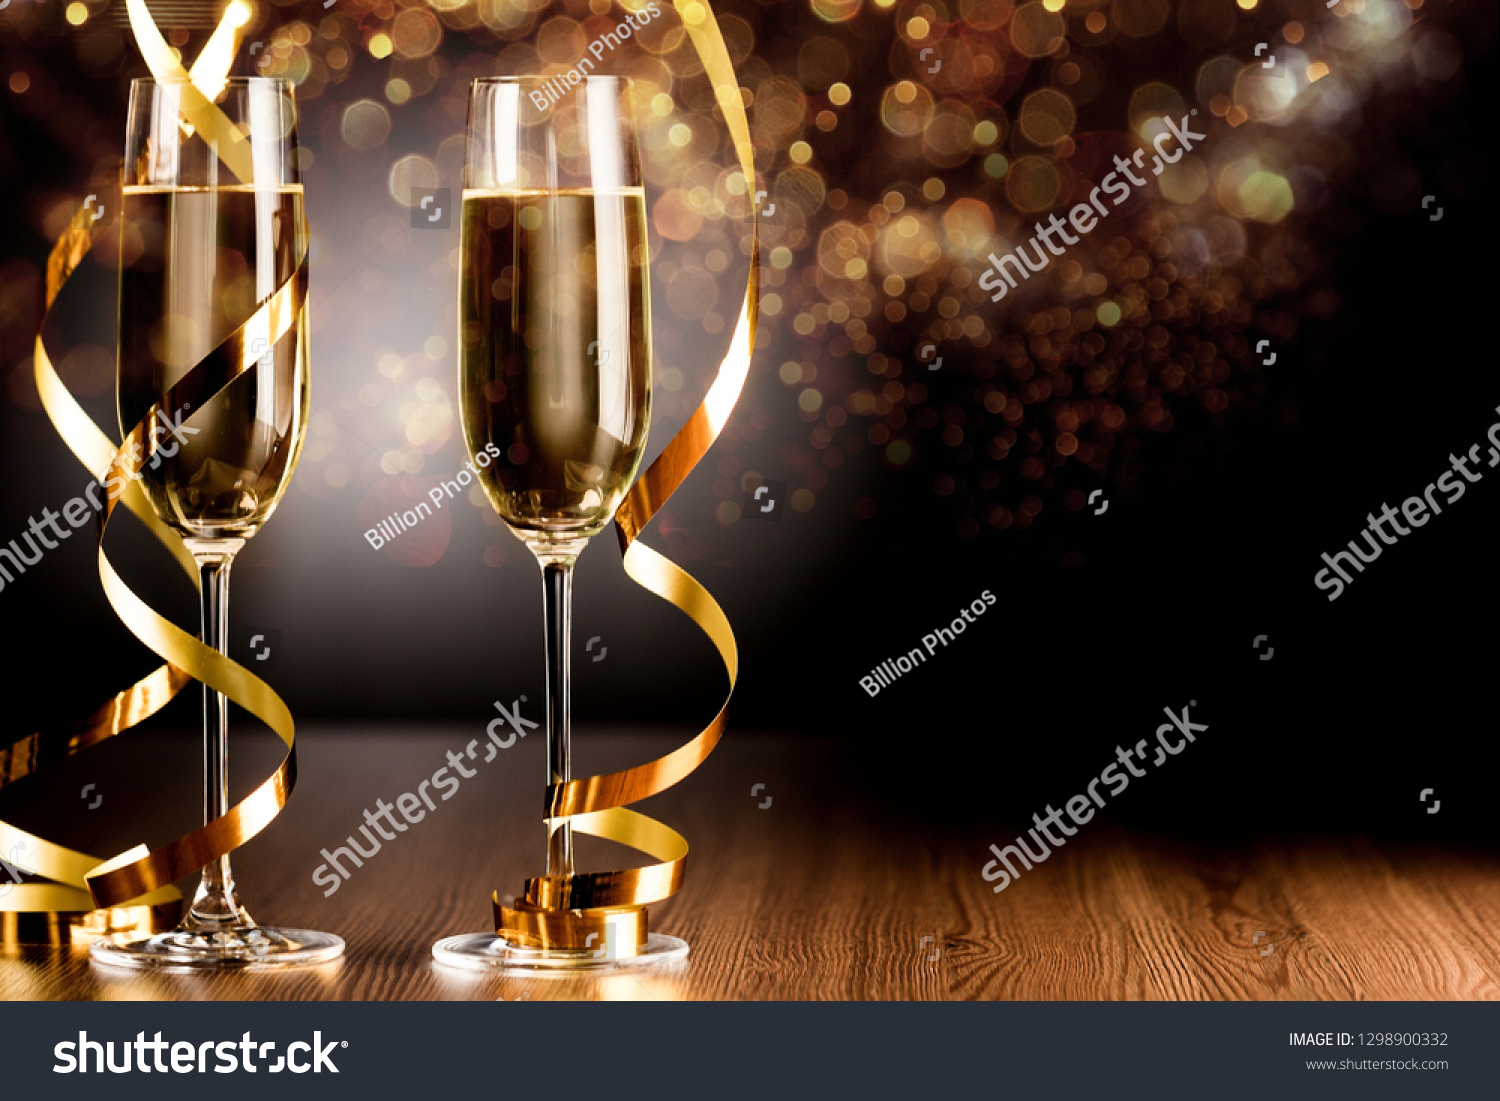 Glasses of champagne with curly ribbon  on wooden table #1298900332